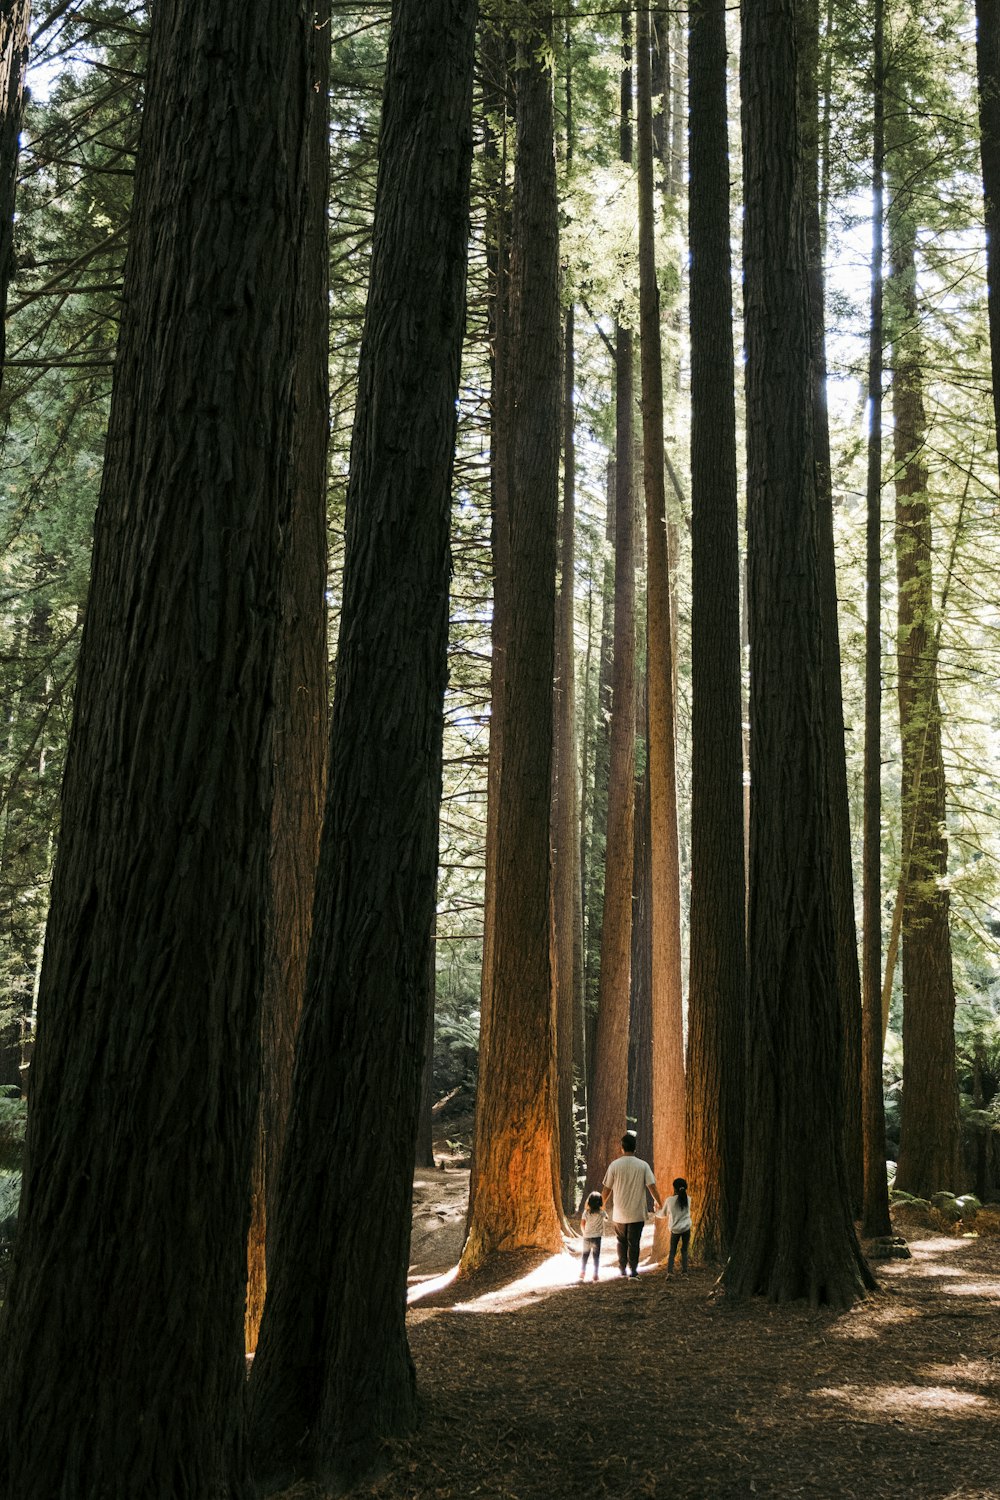 a group of people walking through a forest next to tall trees